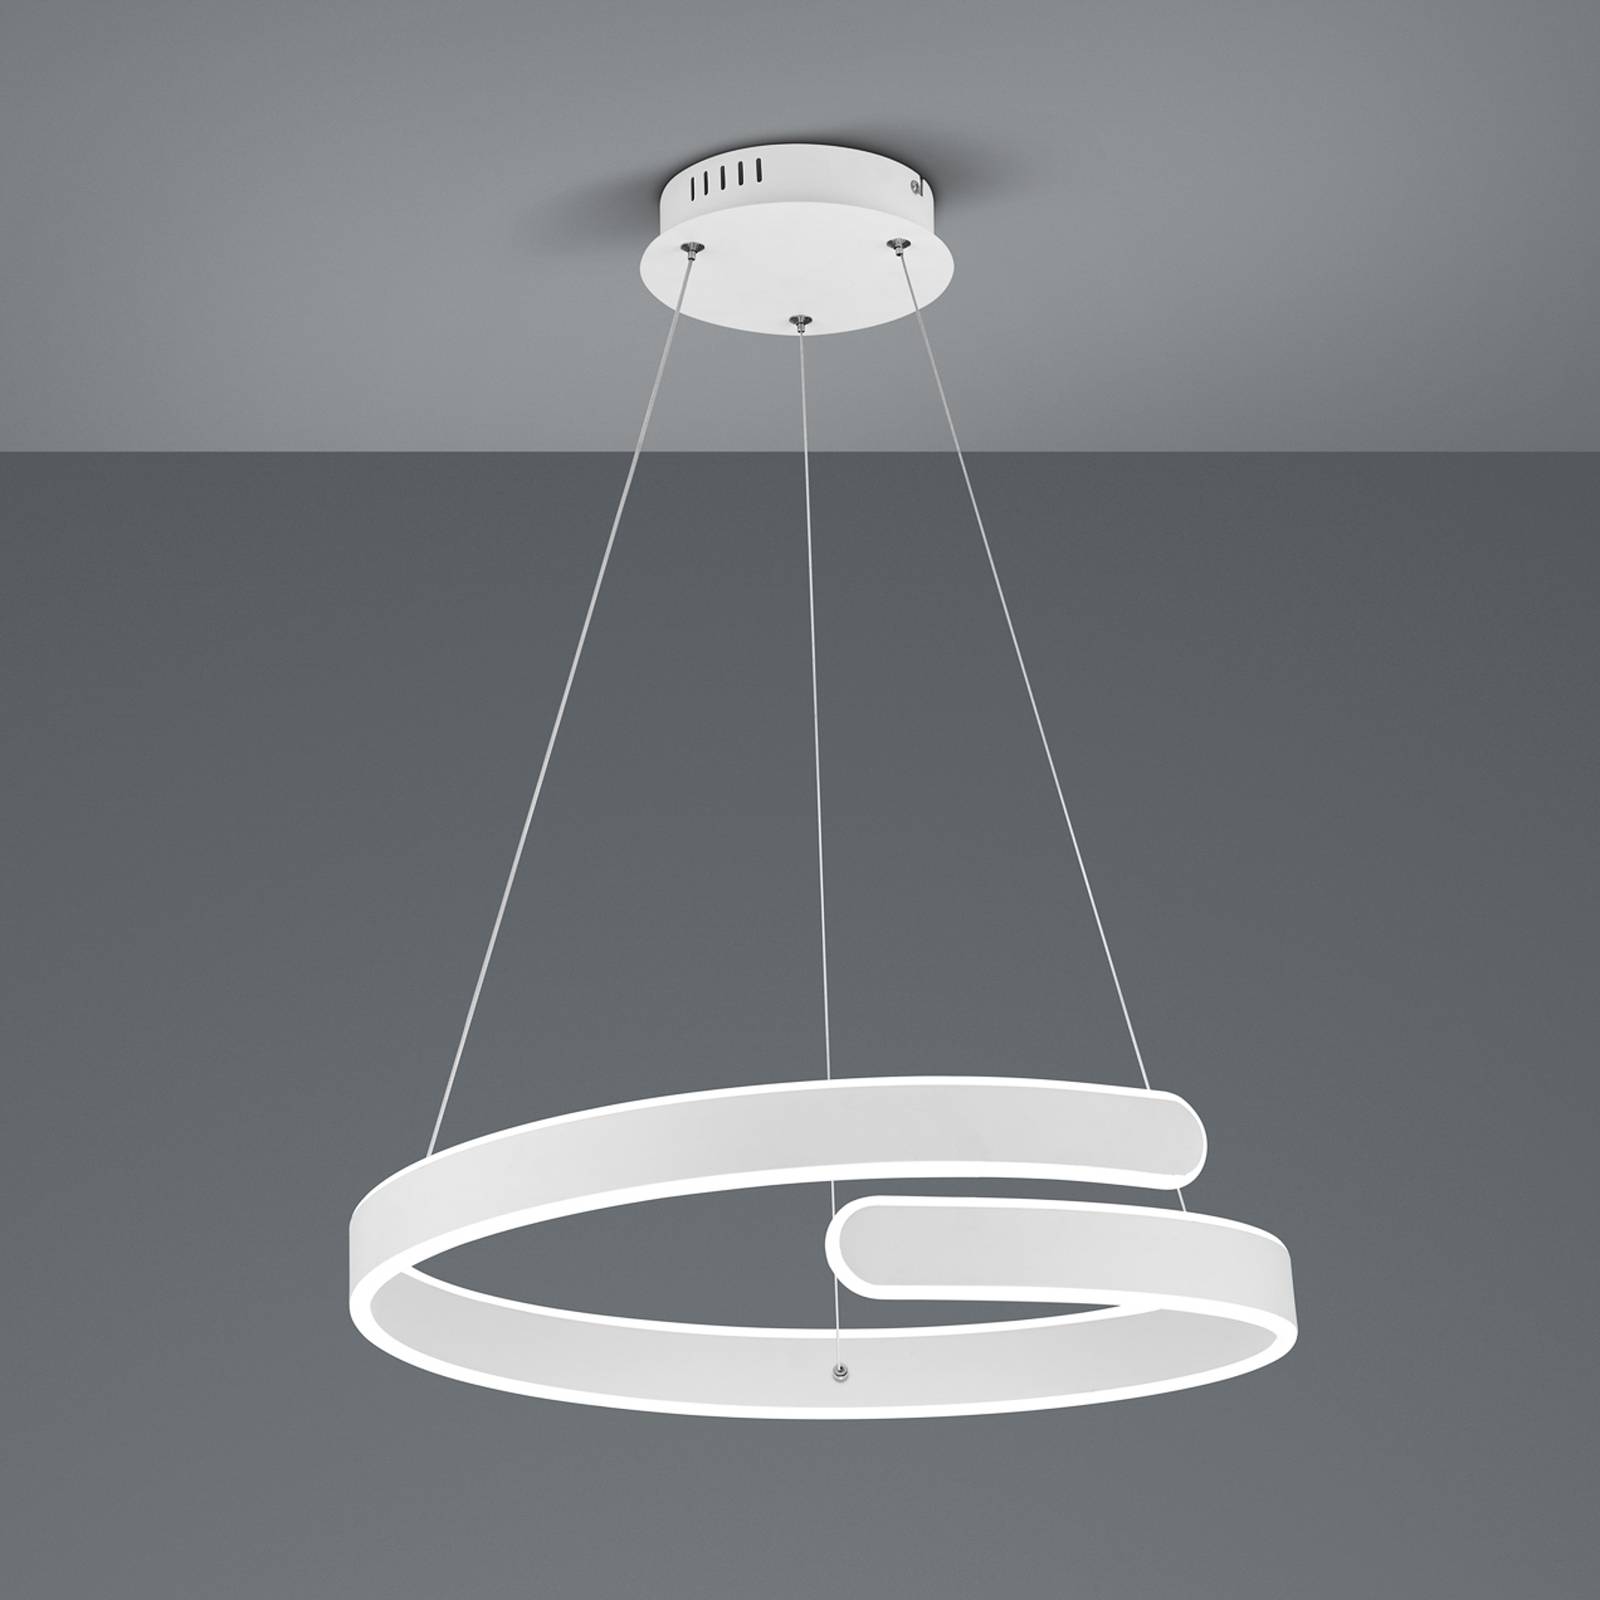 Image of Reality Leuchten Lampada LED sospensione Parma switch-dimmer bianco